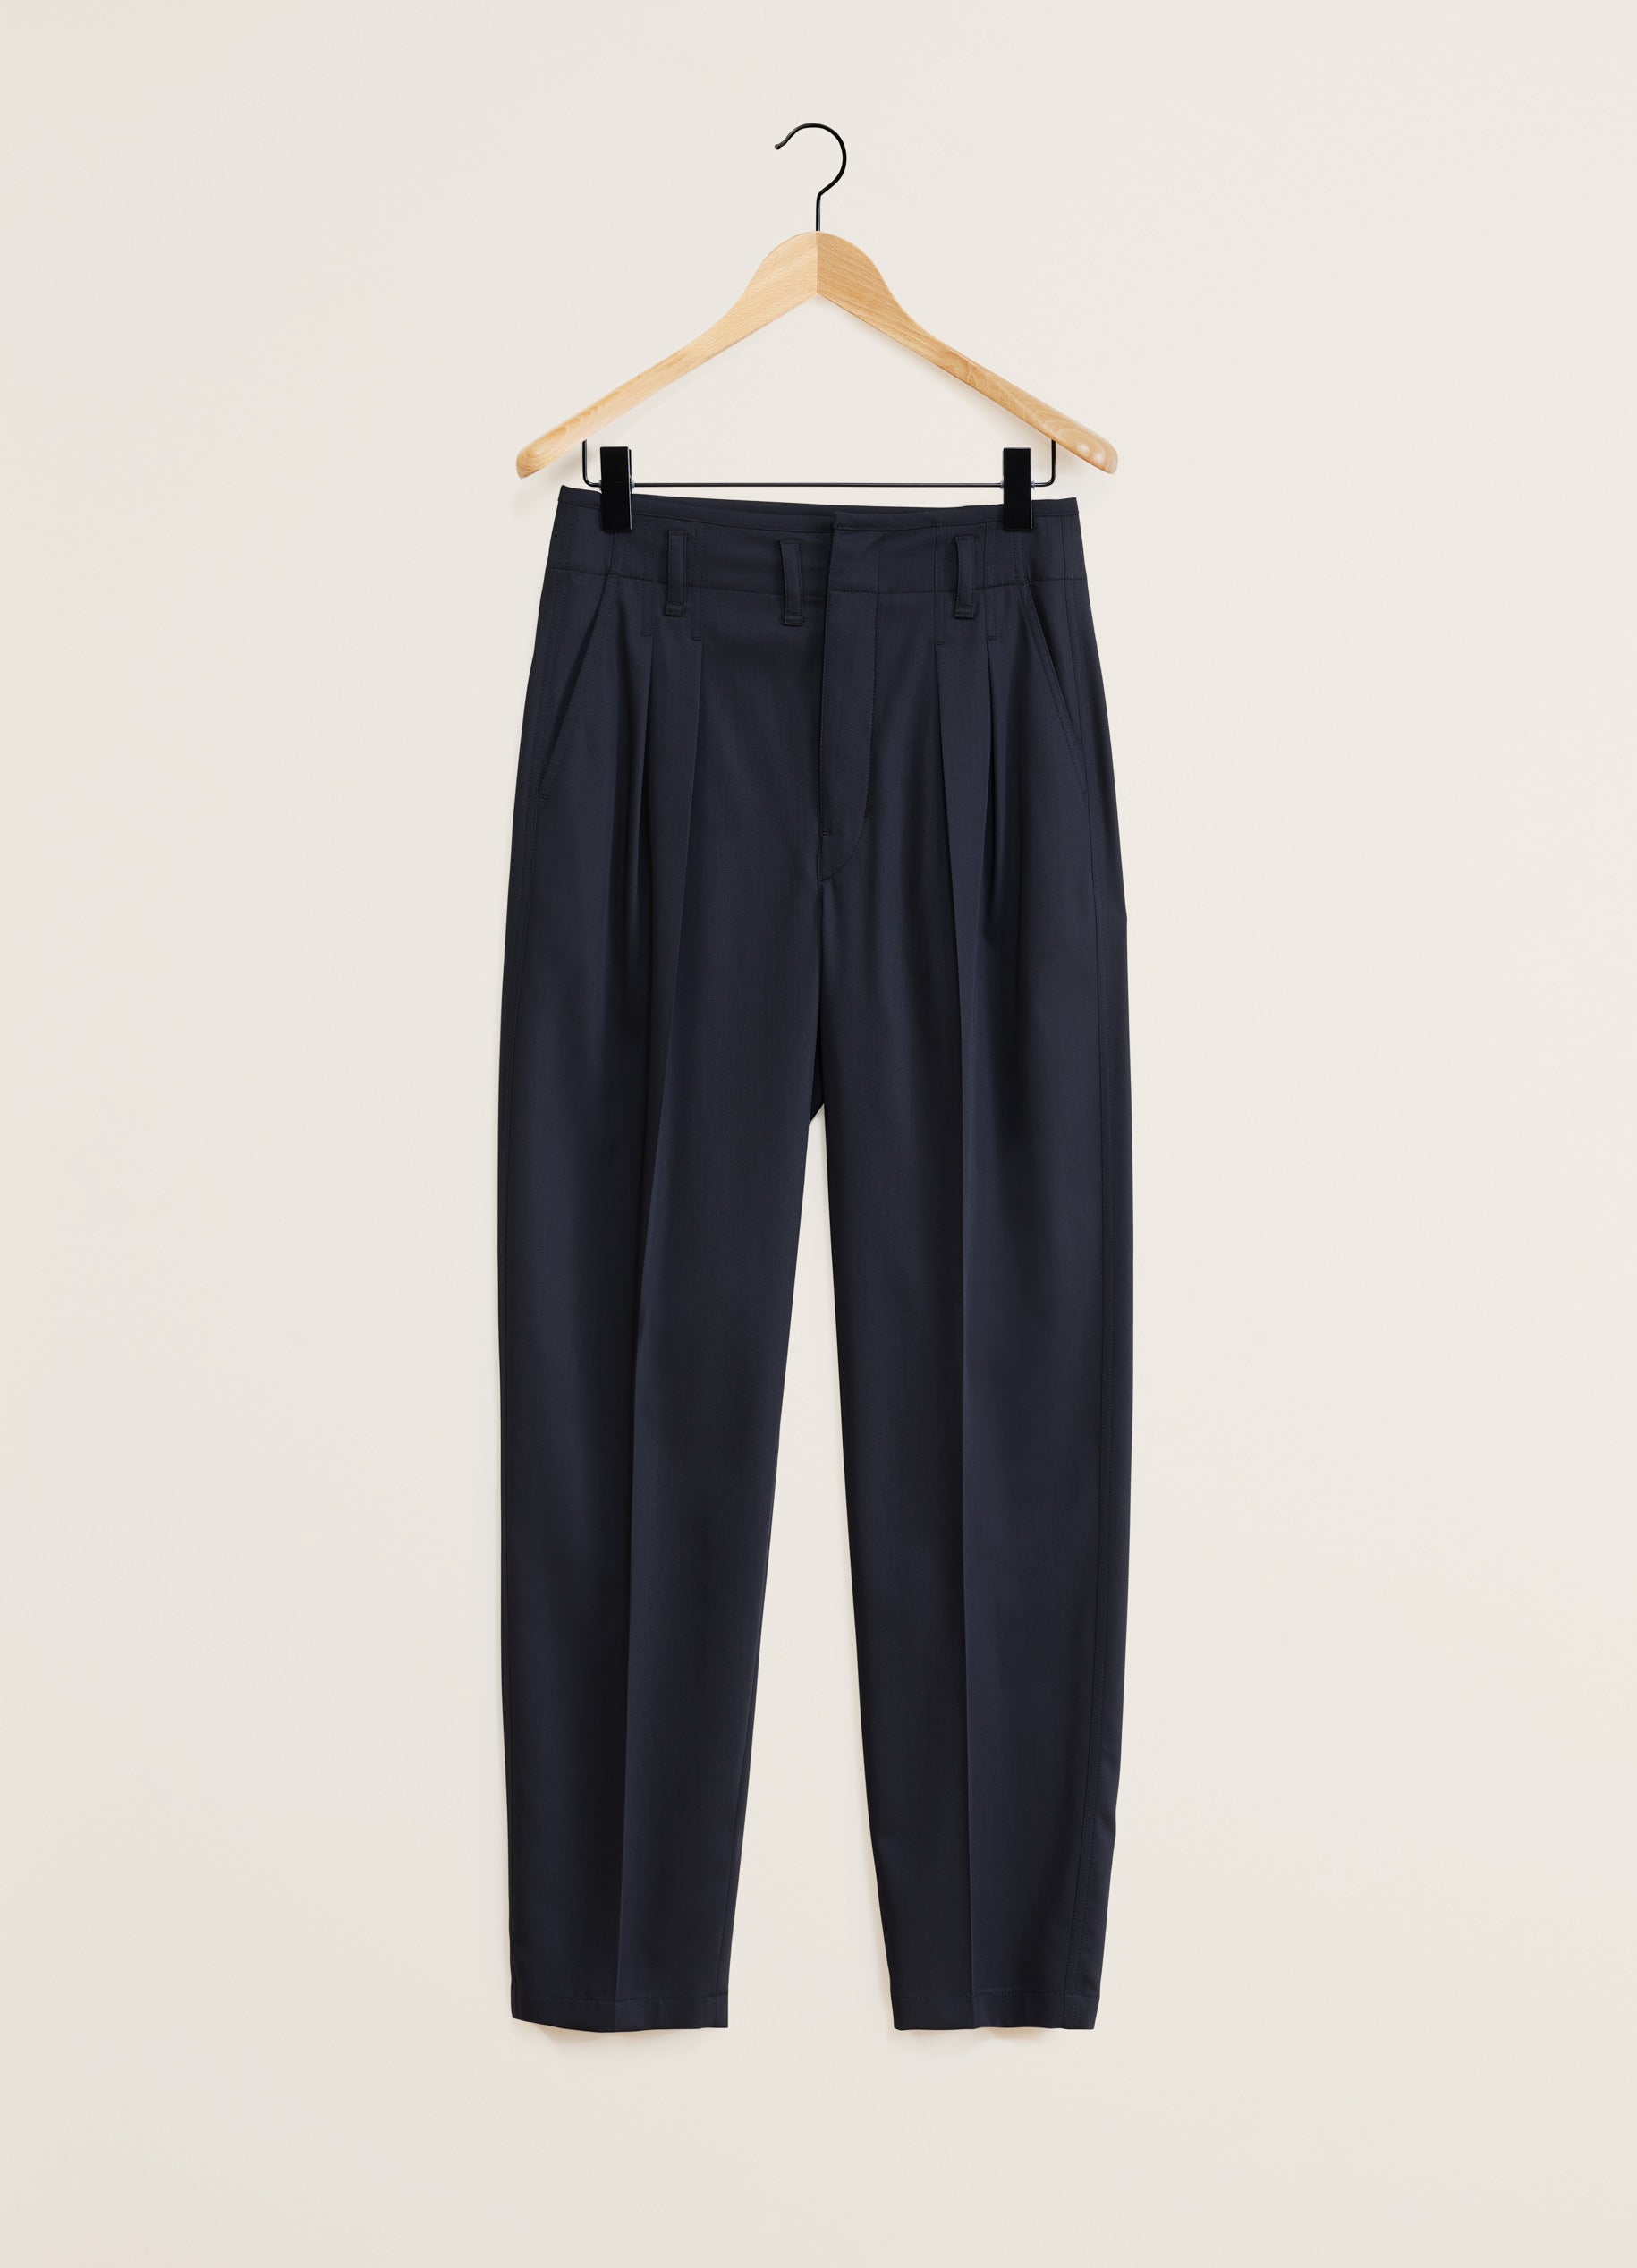 Twisted Workwear Pants in Denim Soft Bleached Black | LEMAIRE